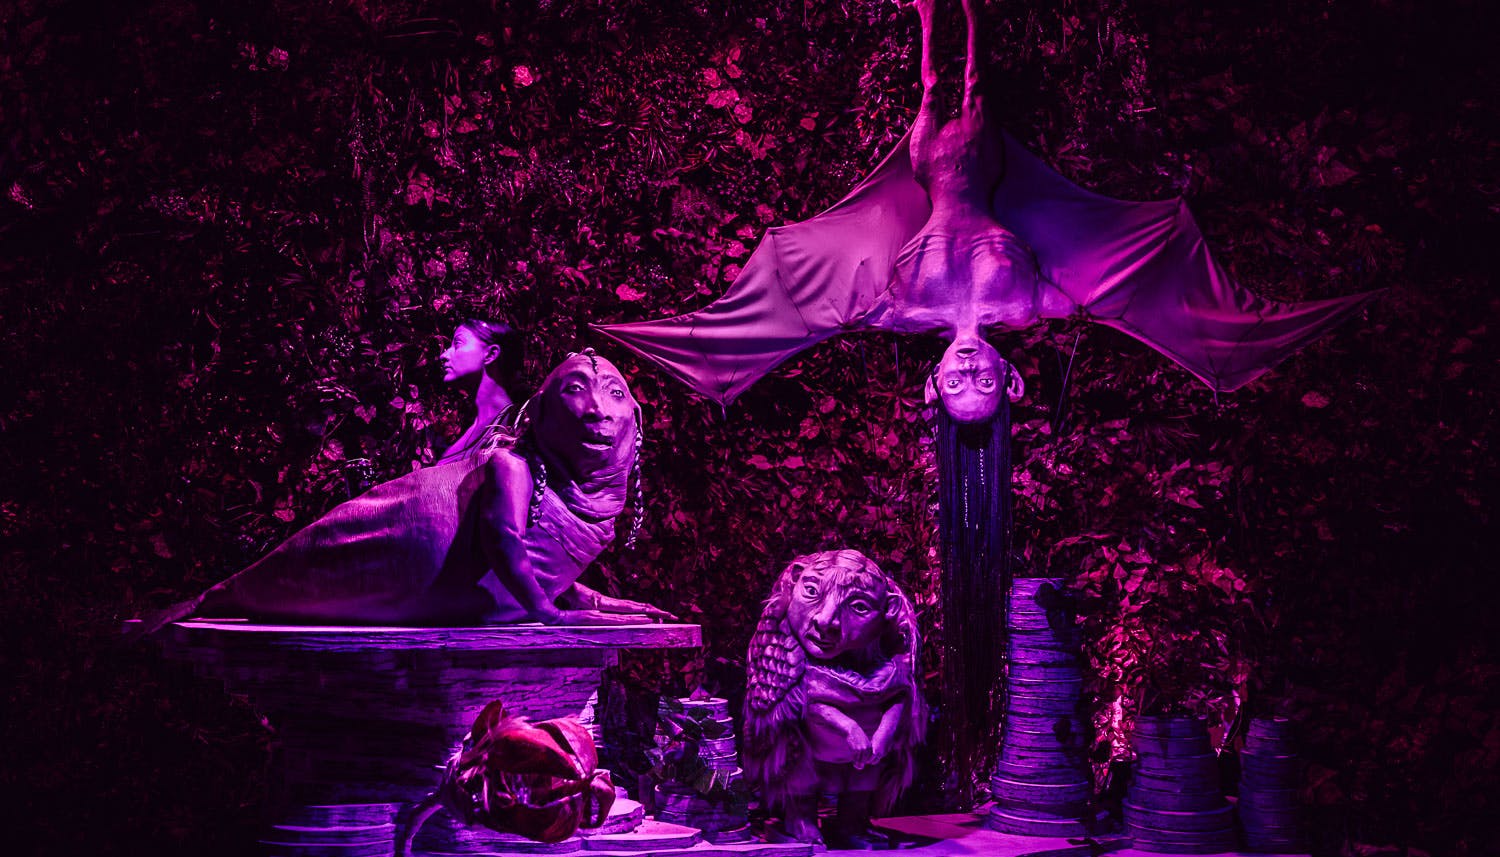 A surreal scenography. Strange sculptures with figures partly zoomorphic and partly human, in front of a background of foliage. Everything is illuminated by a soft violet light.